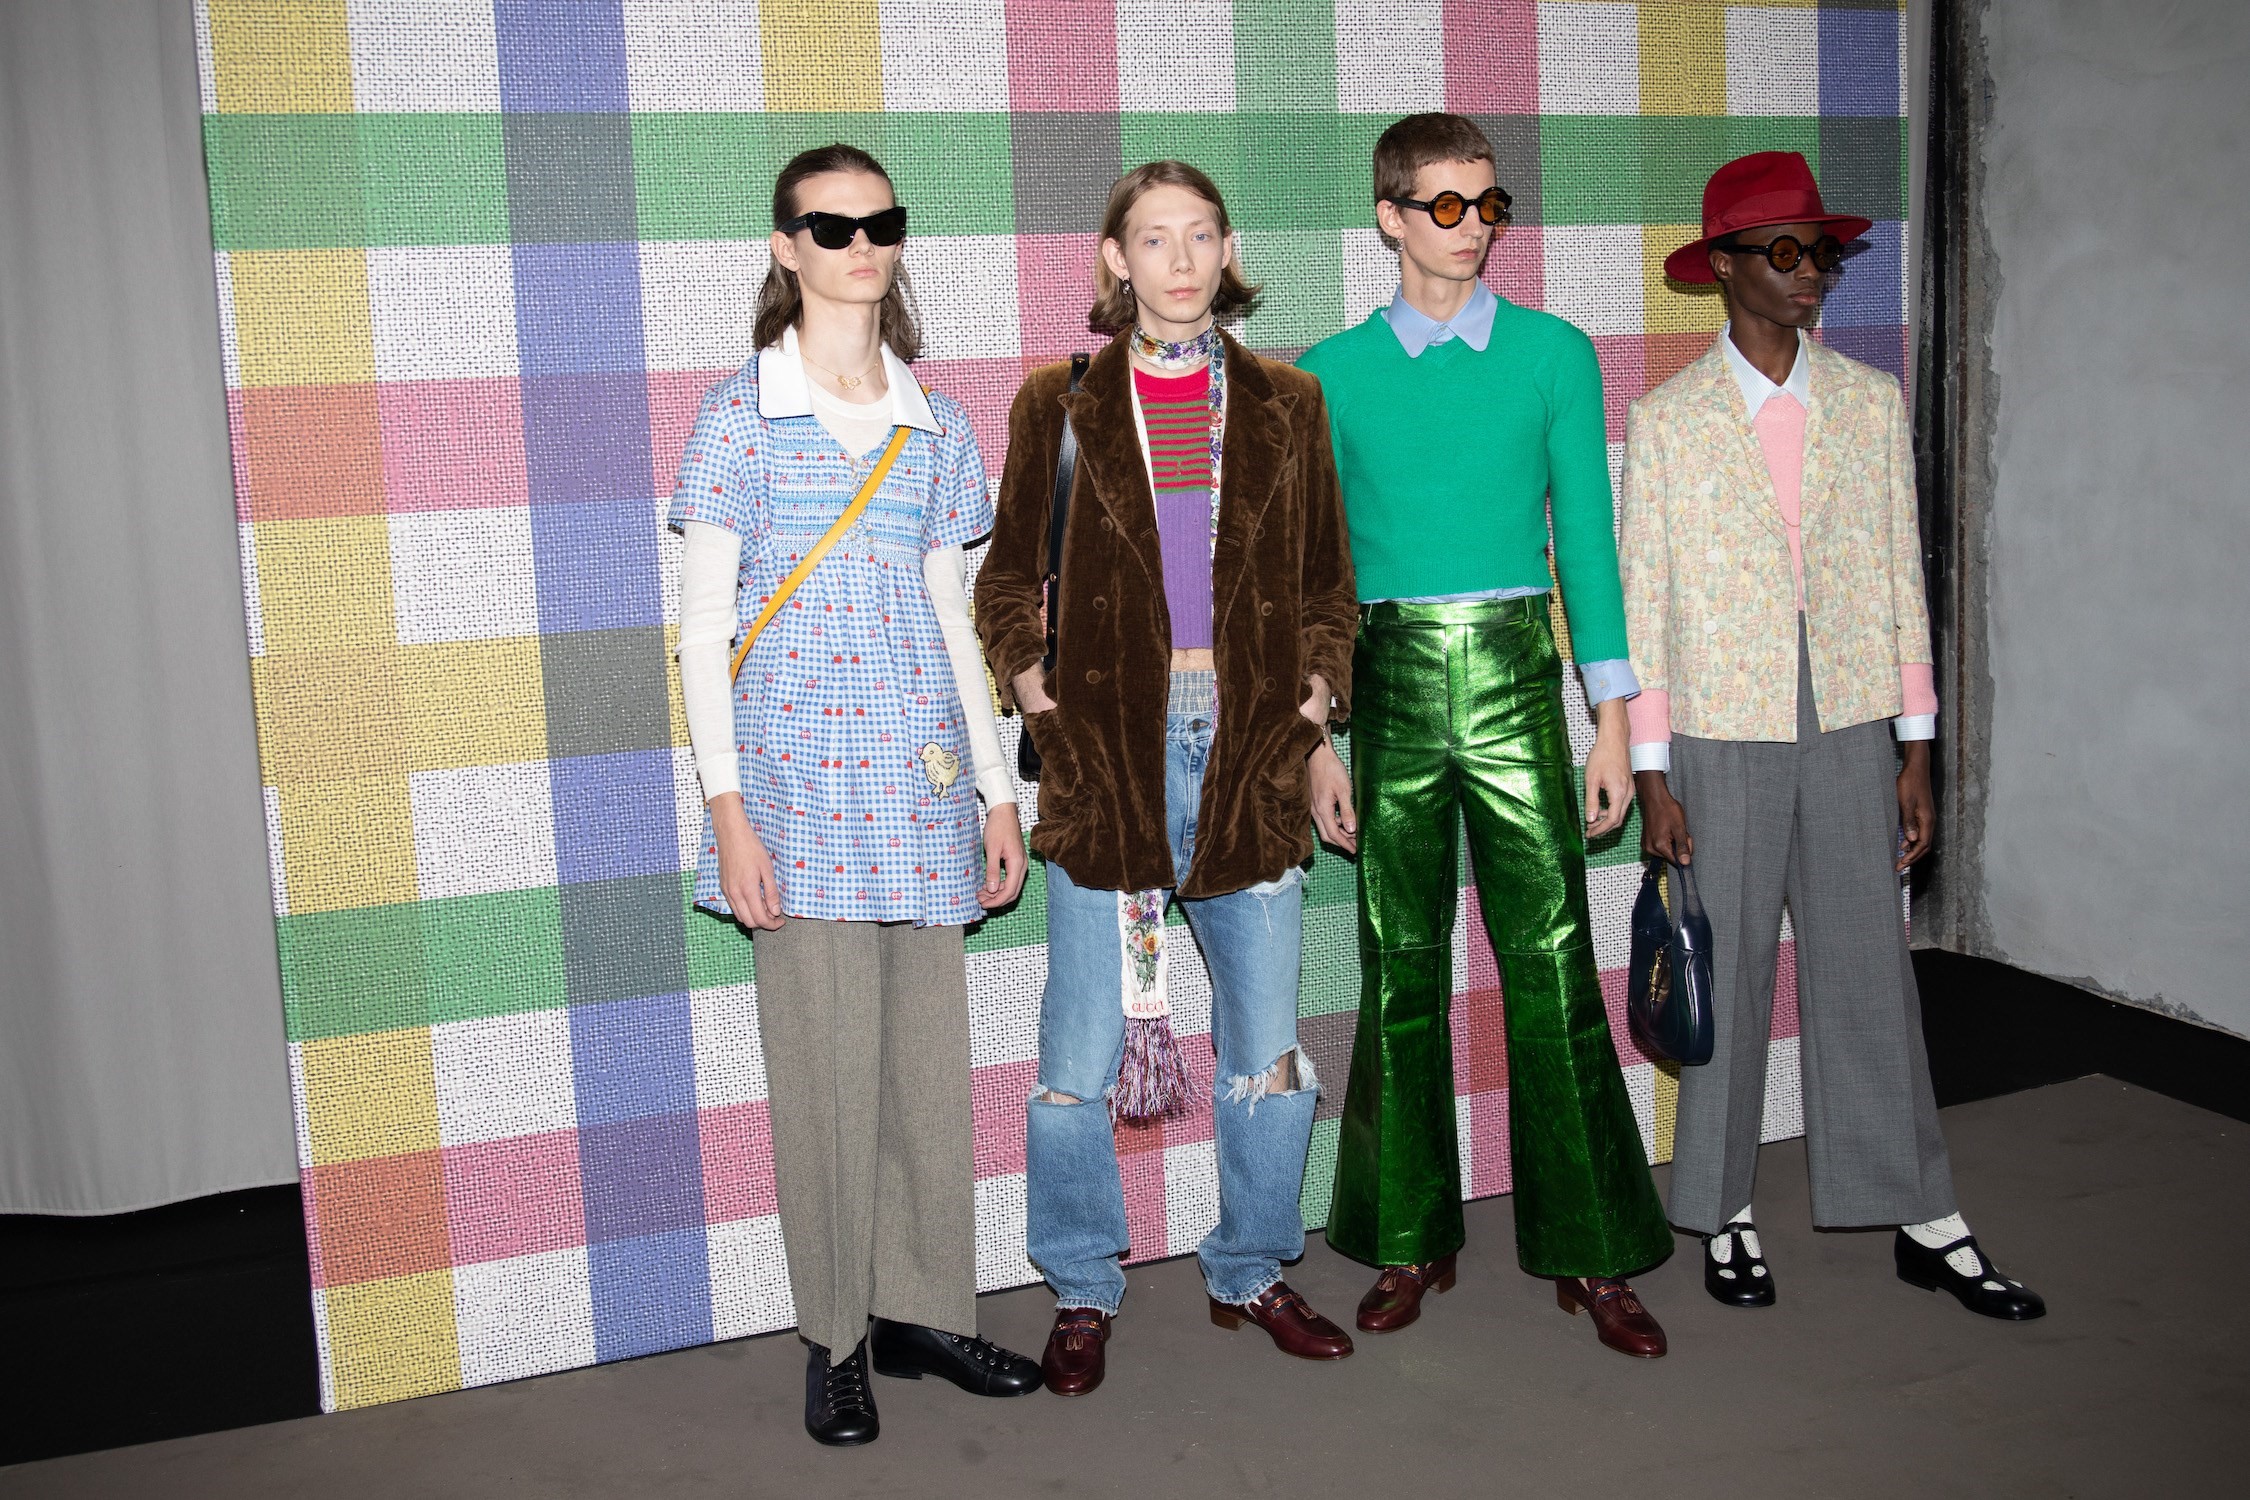 Alessandro Michele Turns the Gucci Fall 2020 Fashion Show Into